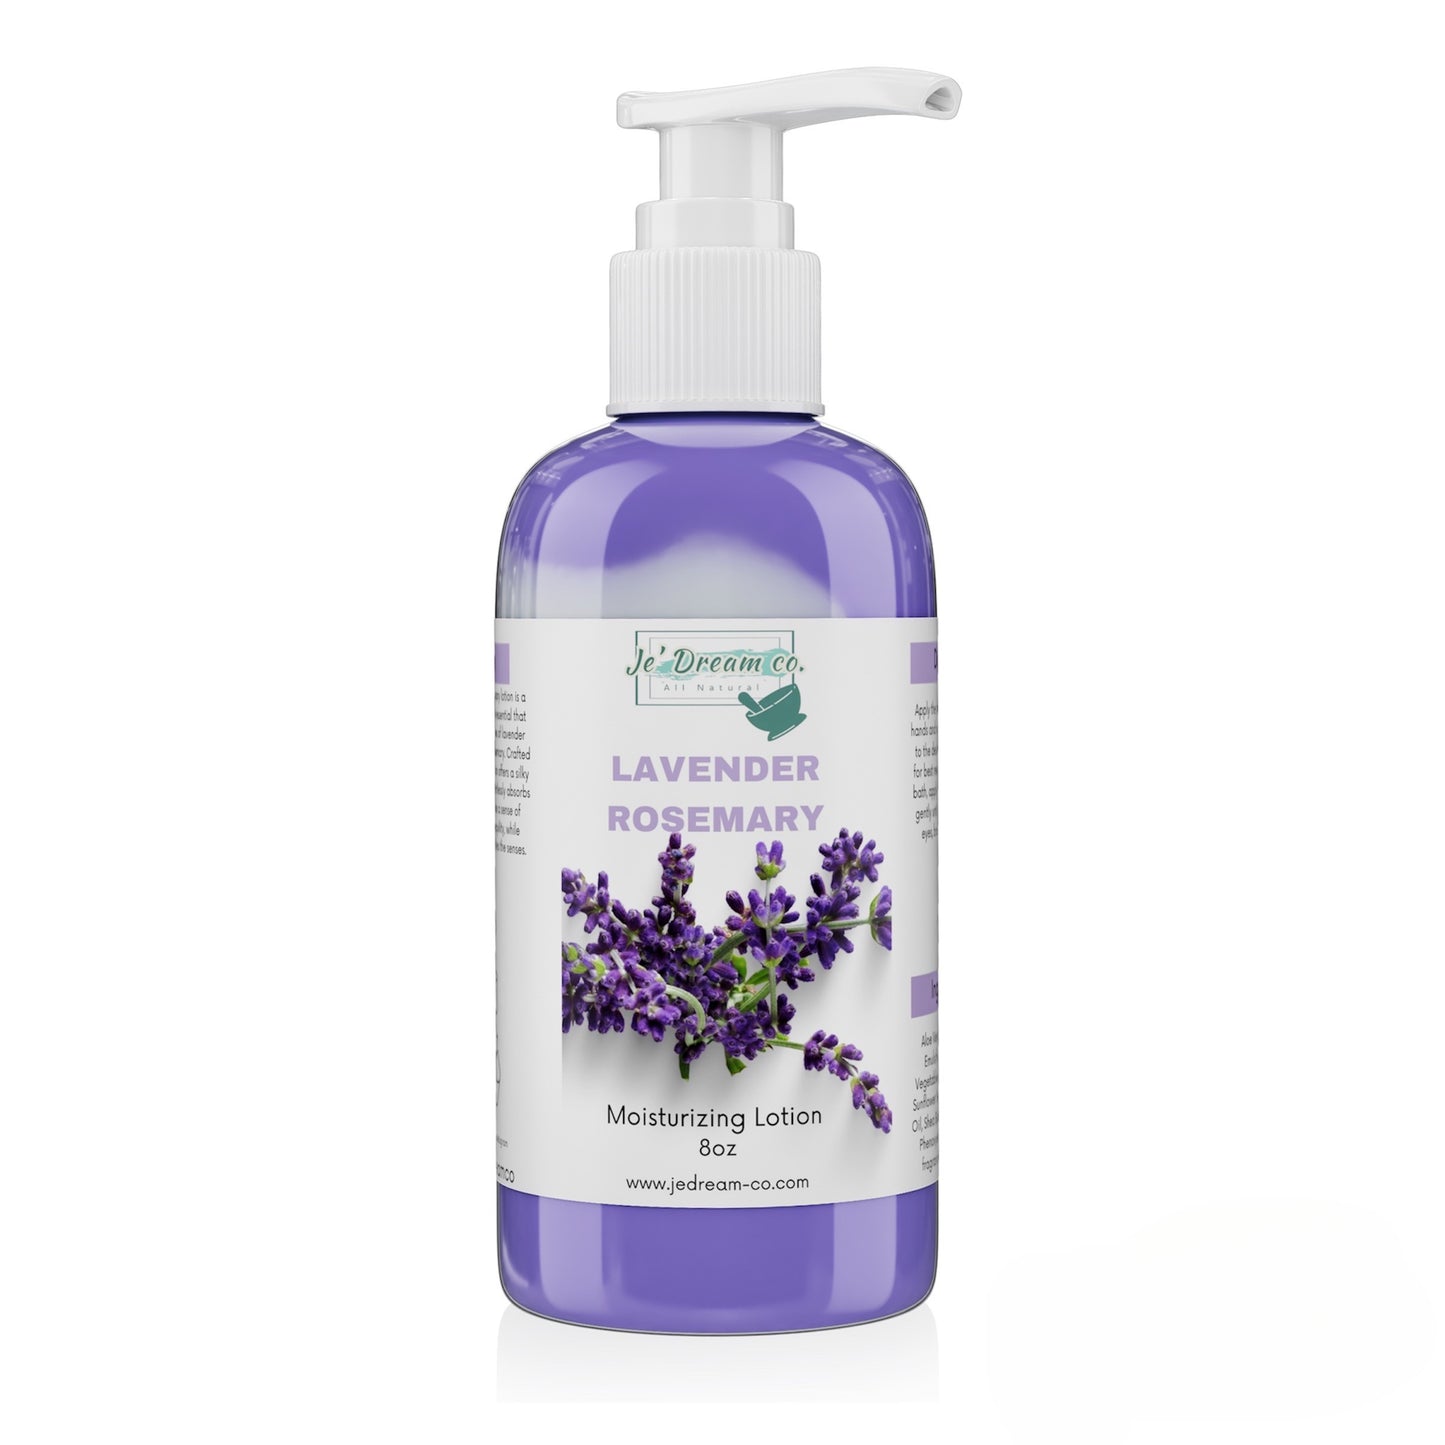 Front packet, lavender rosemary organic face and body lotion 8 ounce bottle 